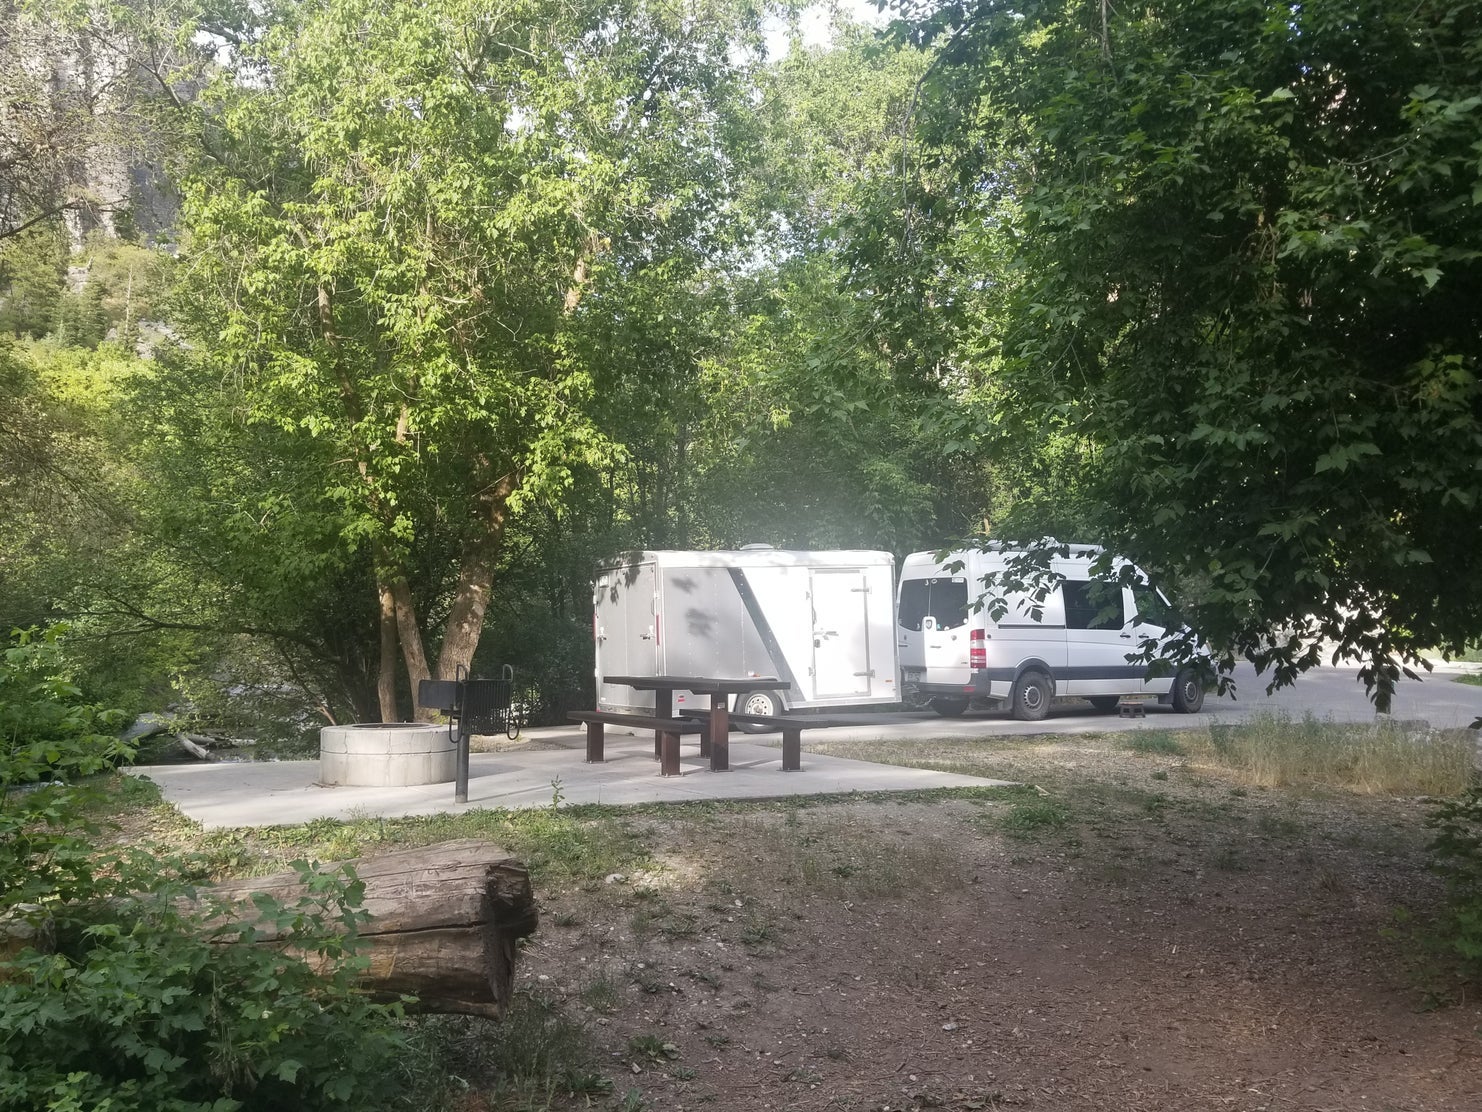 van parked at campsite with trailer